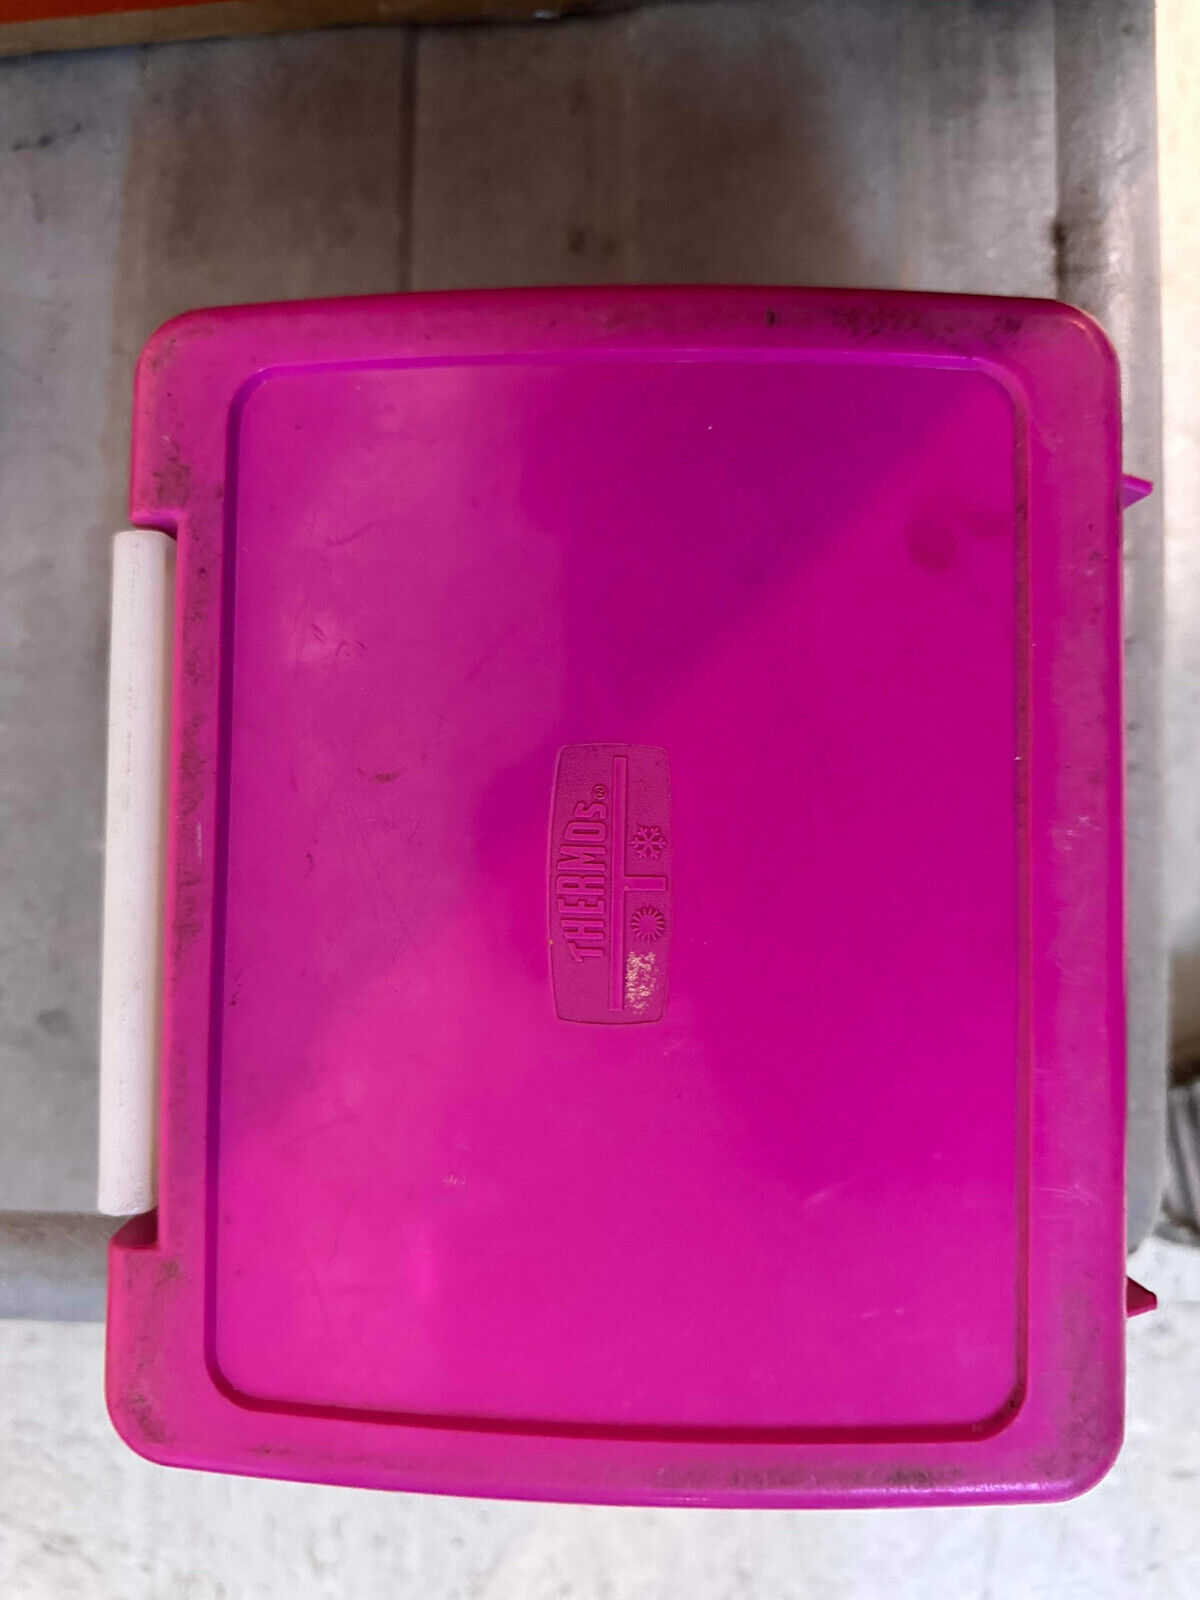 Vintage 80s 1988 Pink Plastic Hollywood Barbie Lunch Box